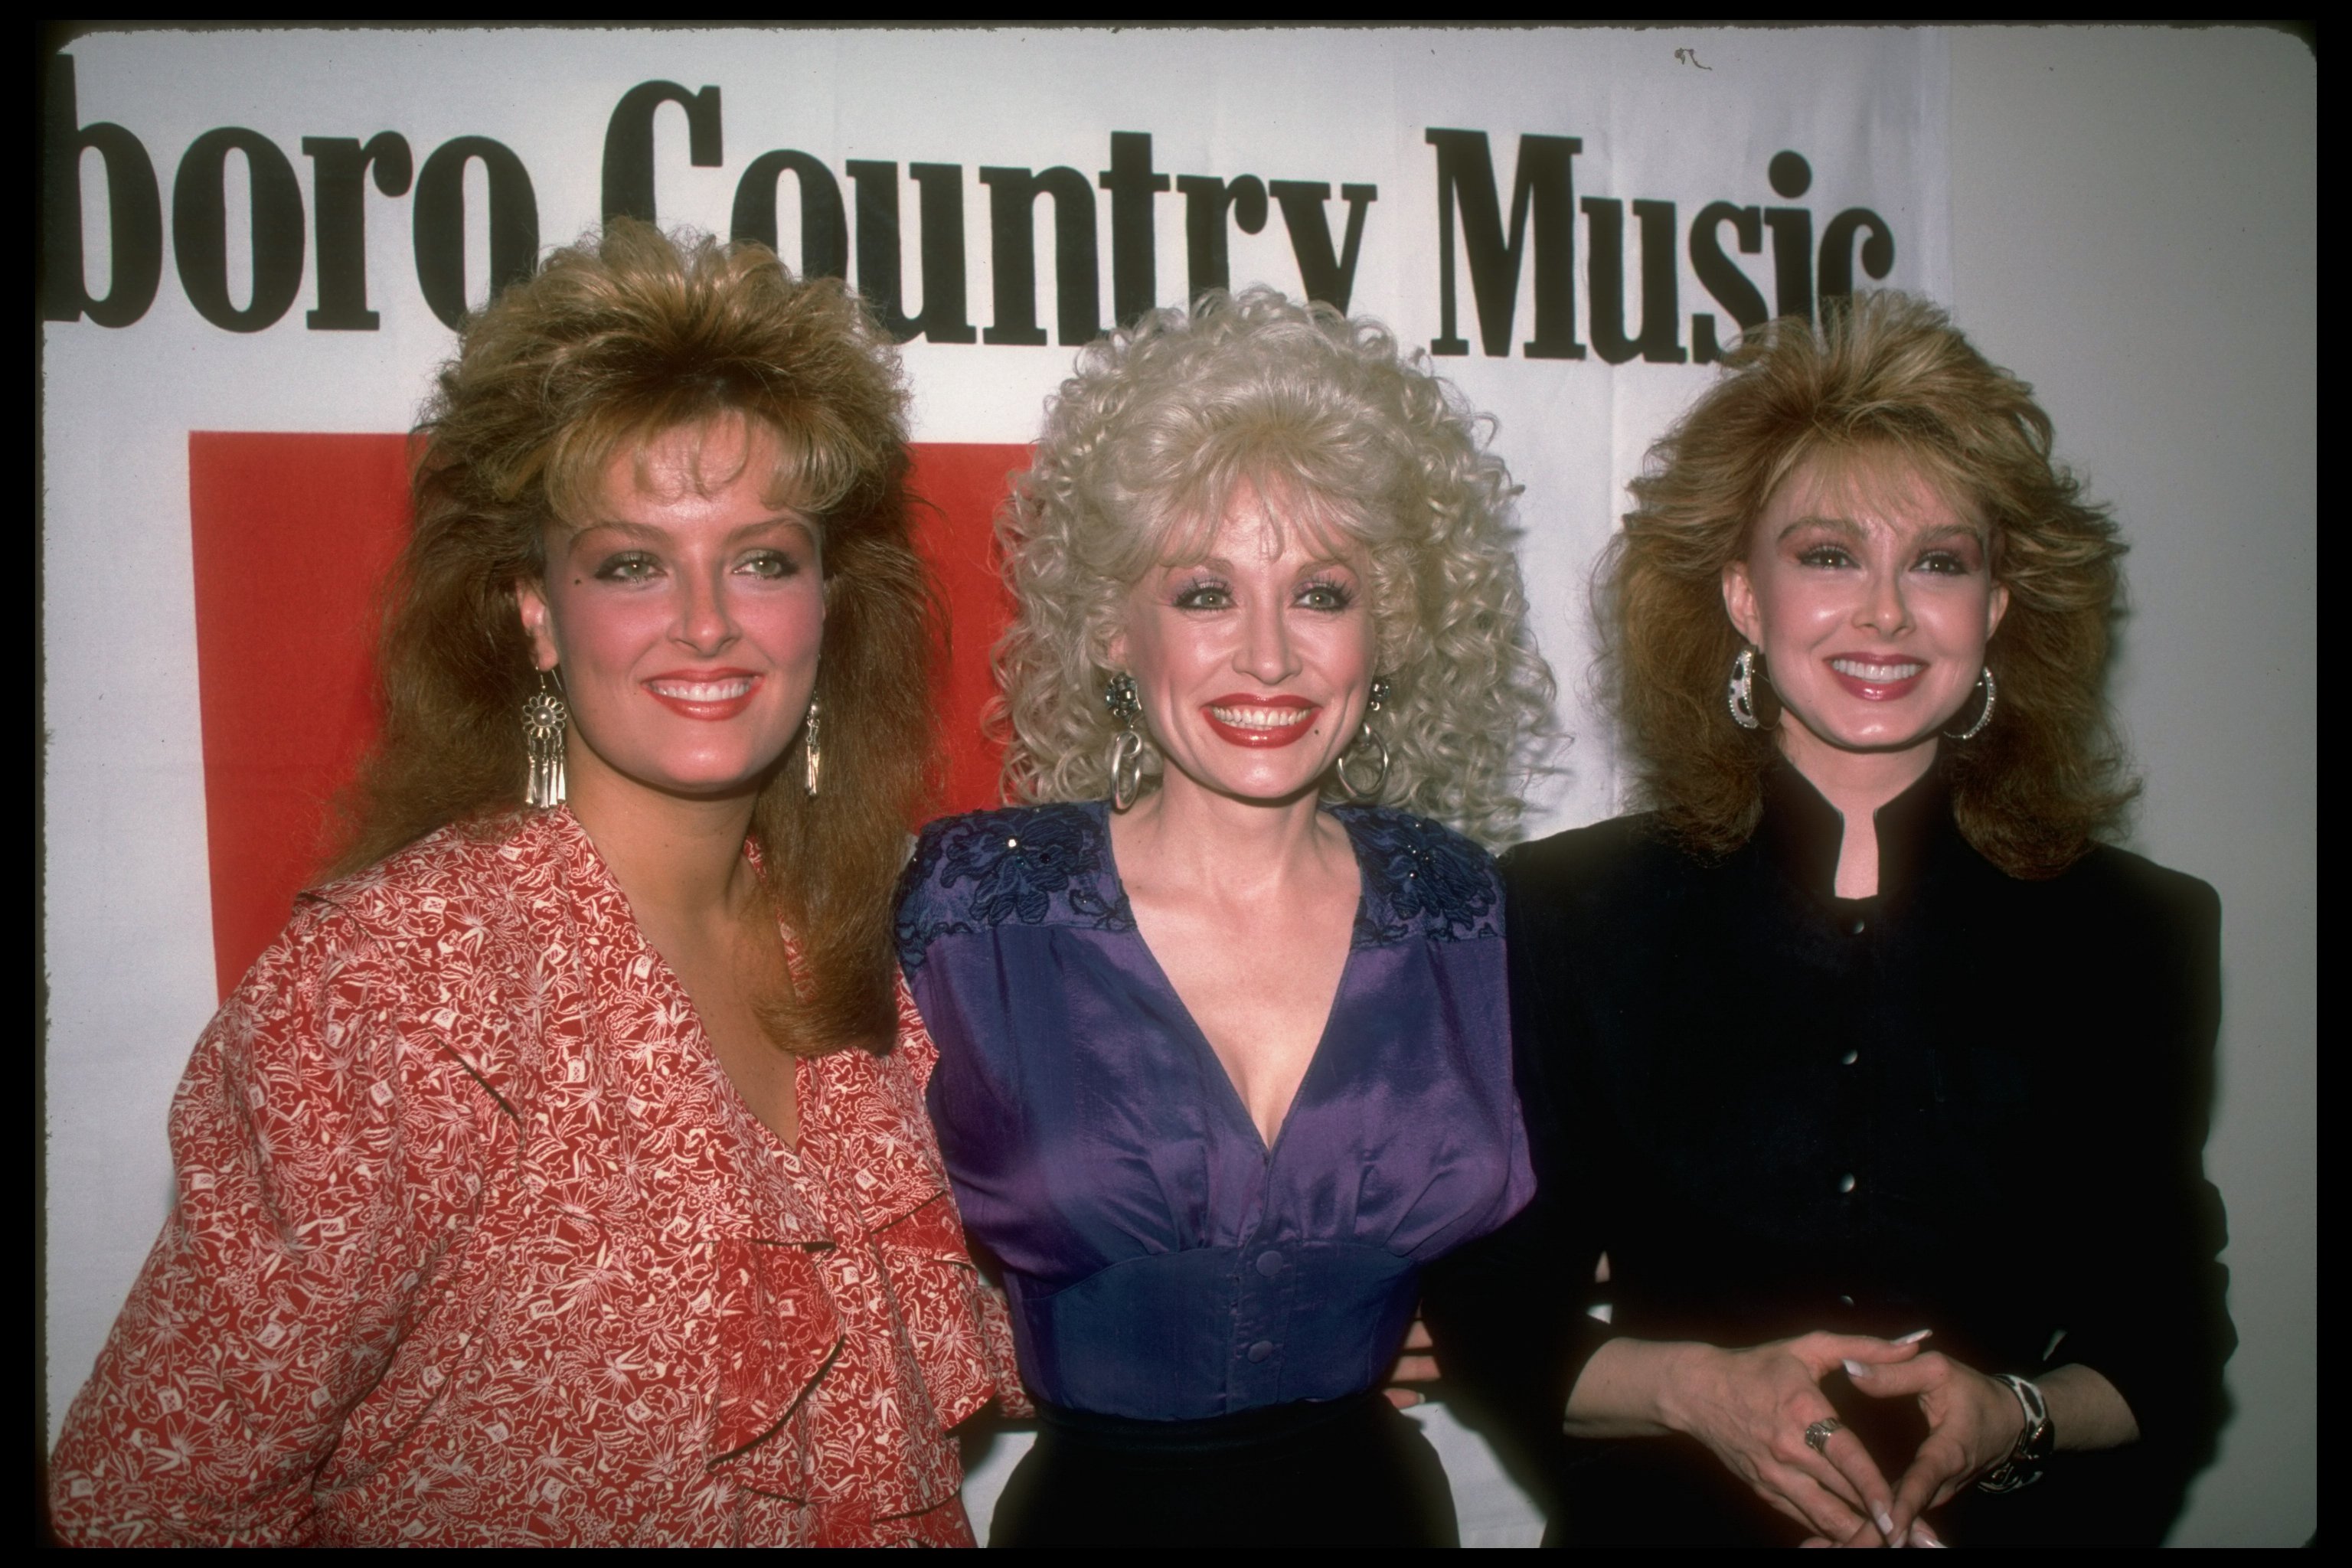 Wynonna Judd, Dolly Parton, and Naomi Judd pose for an image together on March 1, 1987. | Source: Robin Platzer/Getty Images